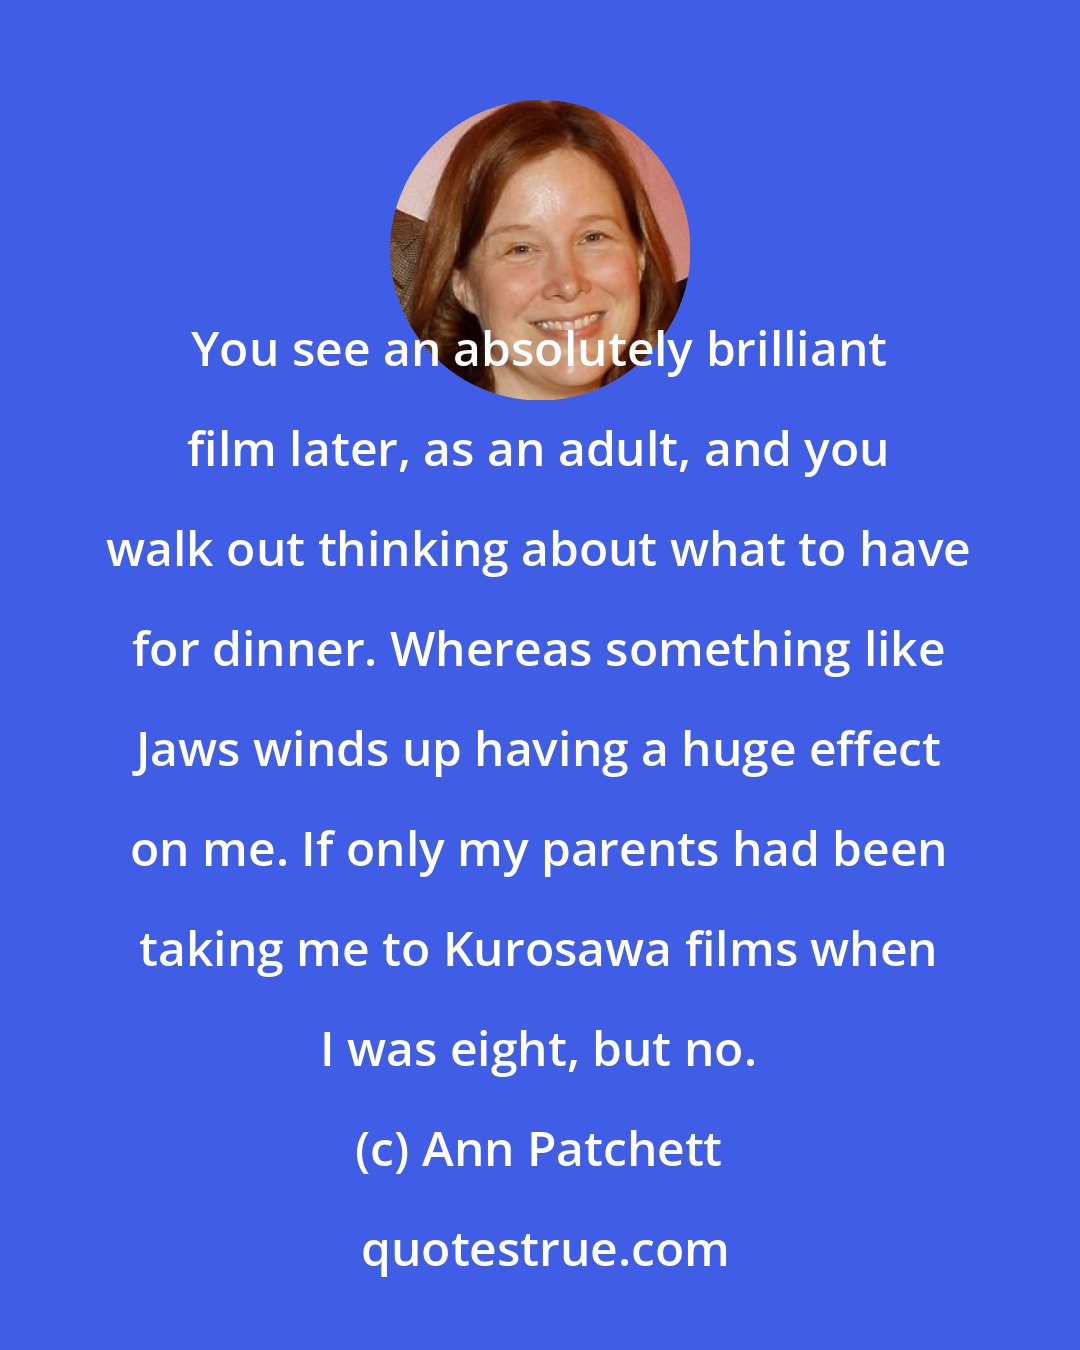 Ann Patchett: You see an absolutely brilliant film later, as an adult, and you walk out thinking about what to have for dinner. Whereas something like Jaws winds up having a huge effect on me. If only my parents had been taking me to Kurosawa films when I was eight, but no.